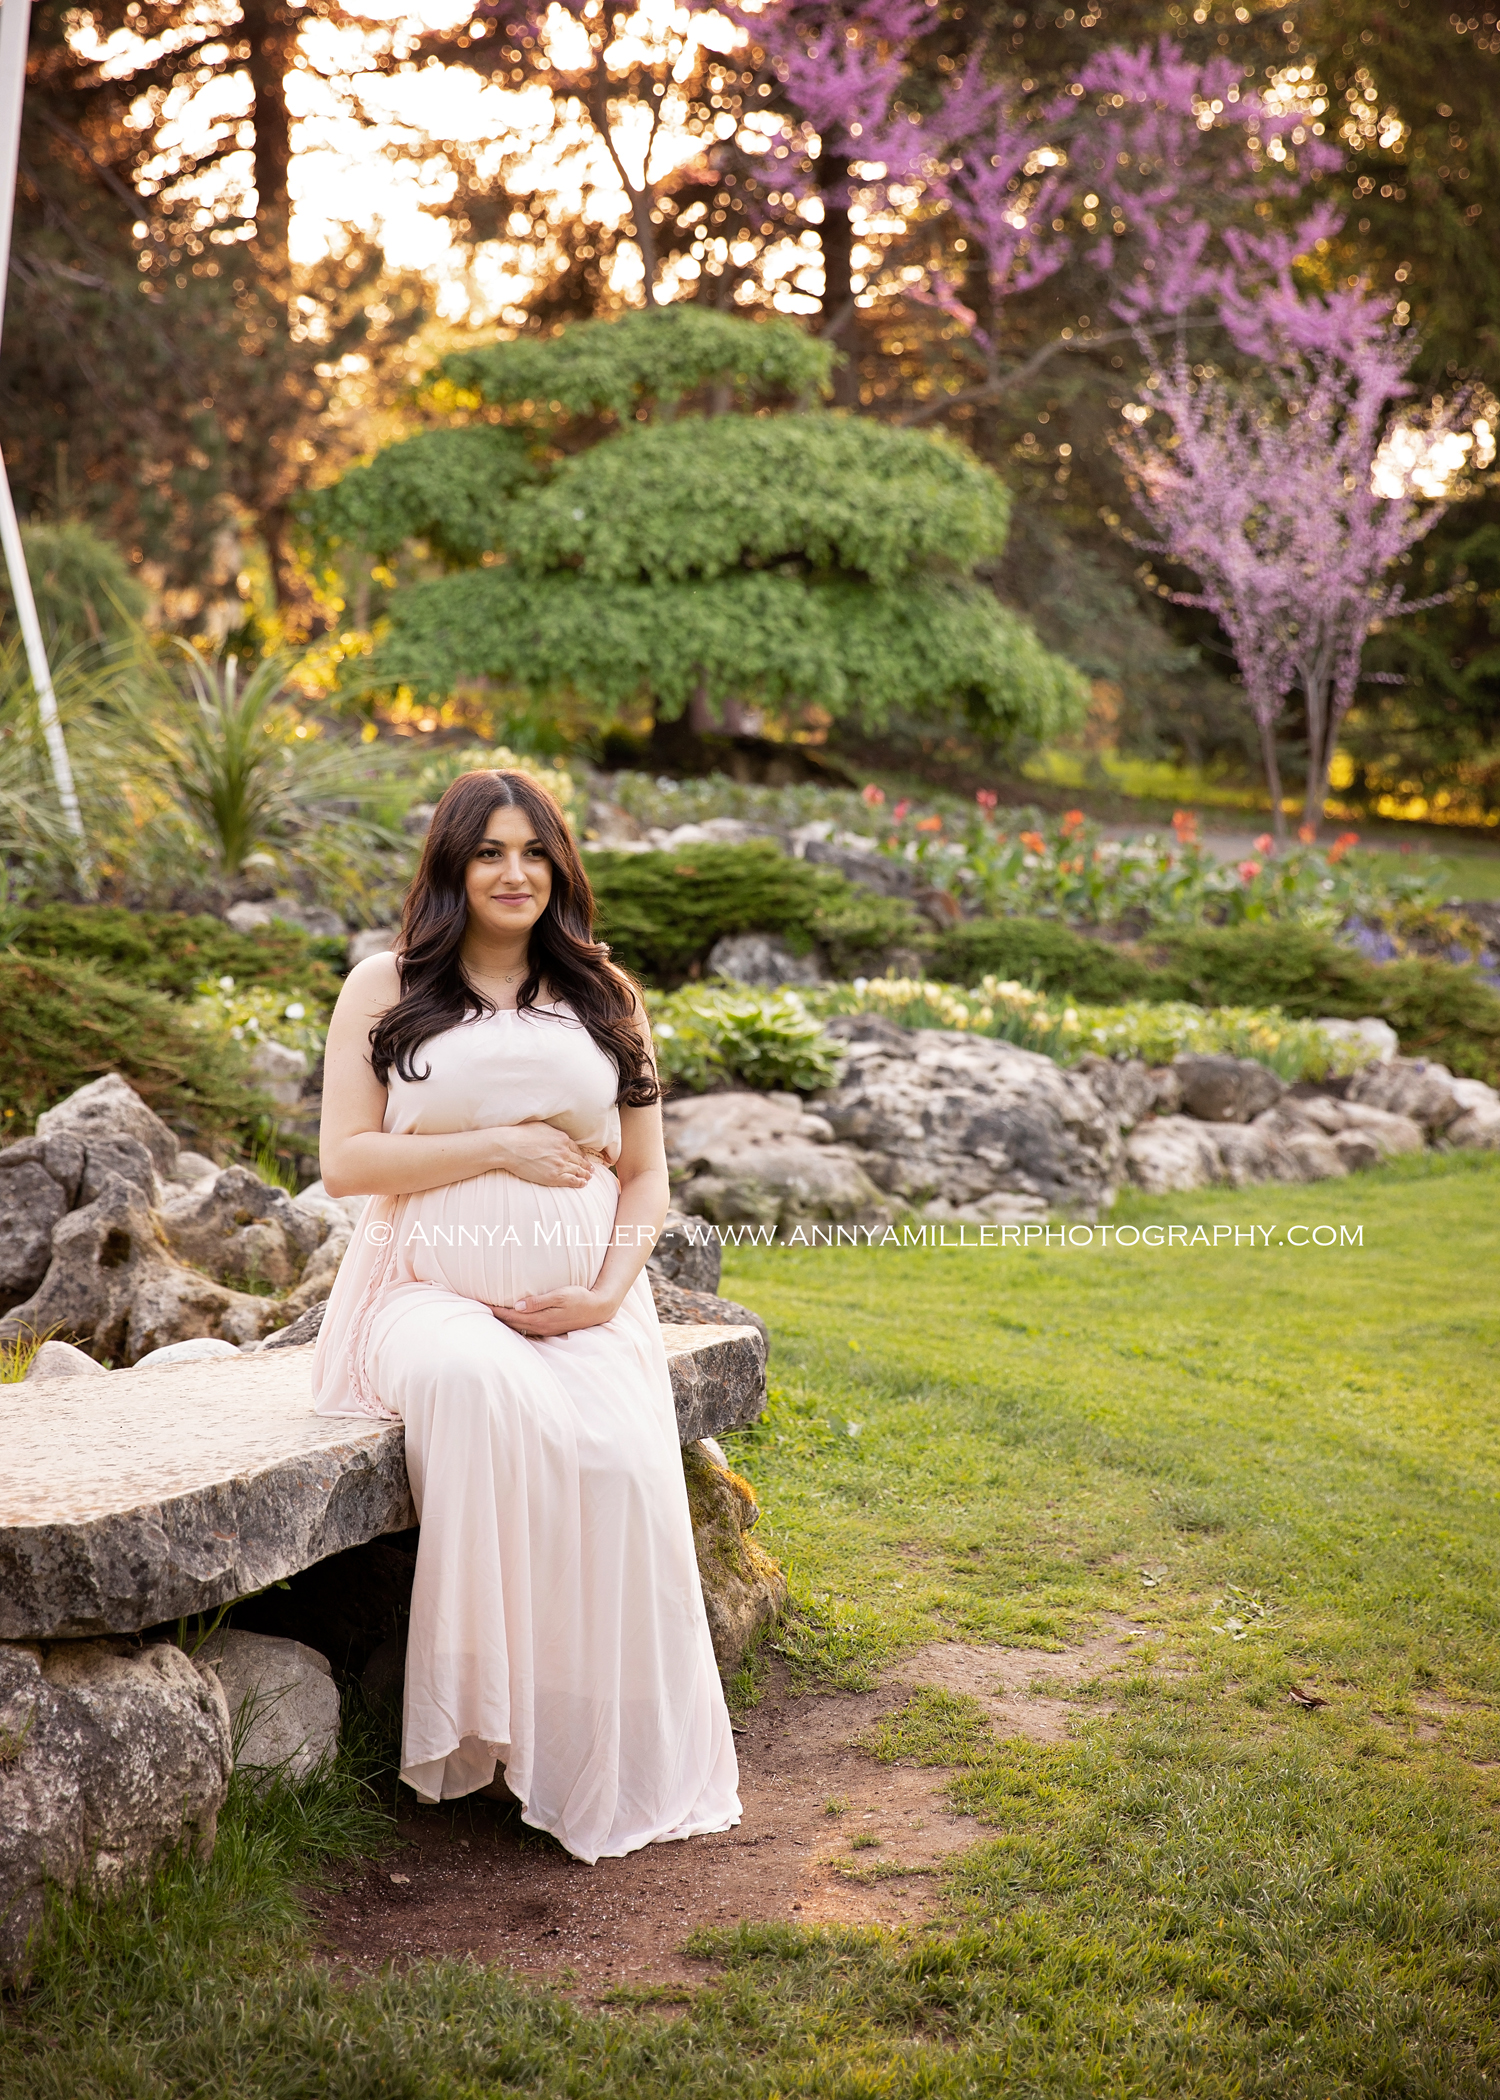 Portrait of beautiful pregnancy mama to be by Durham Maternity and newborn photographer Annya Miller